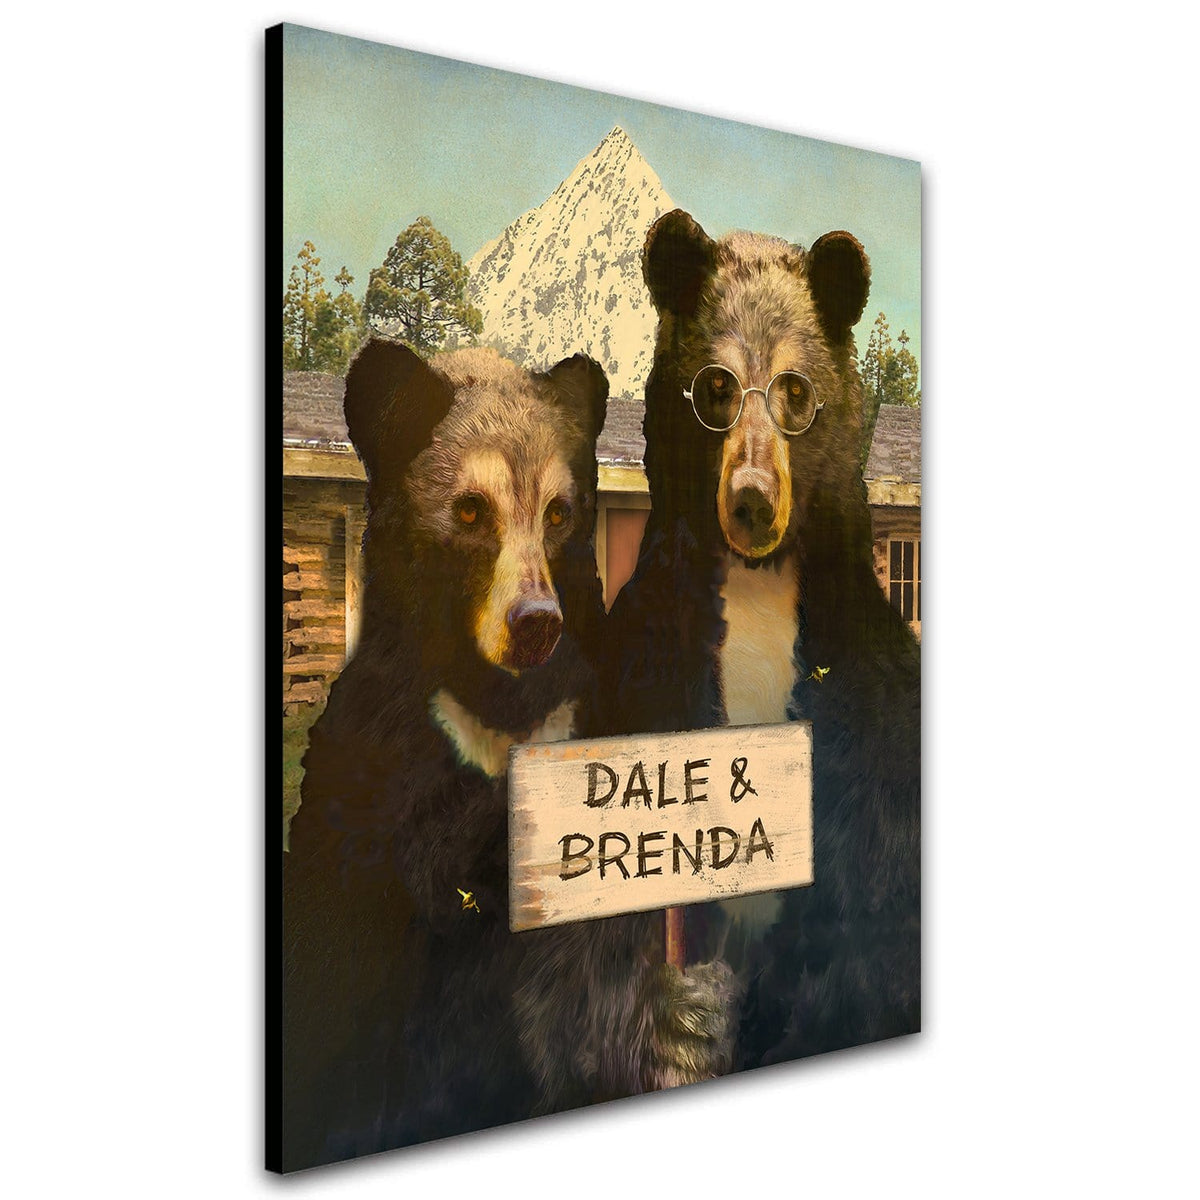 Collectable Black Bear Gift Personalized Art - Block Mount Option from Personal-Prints